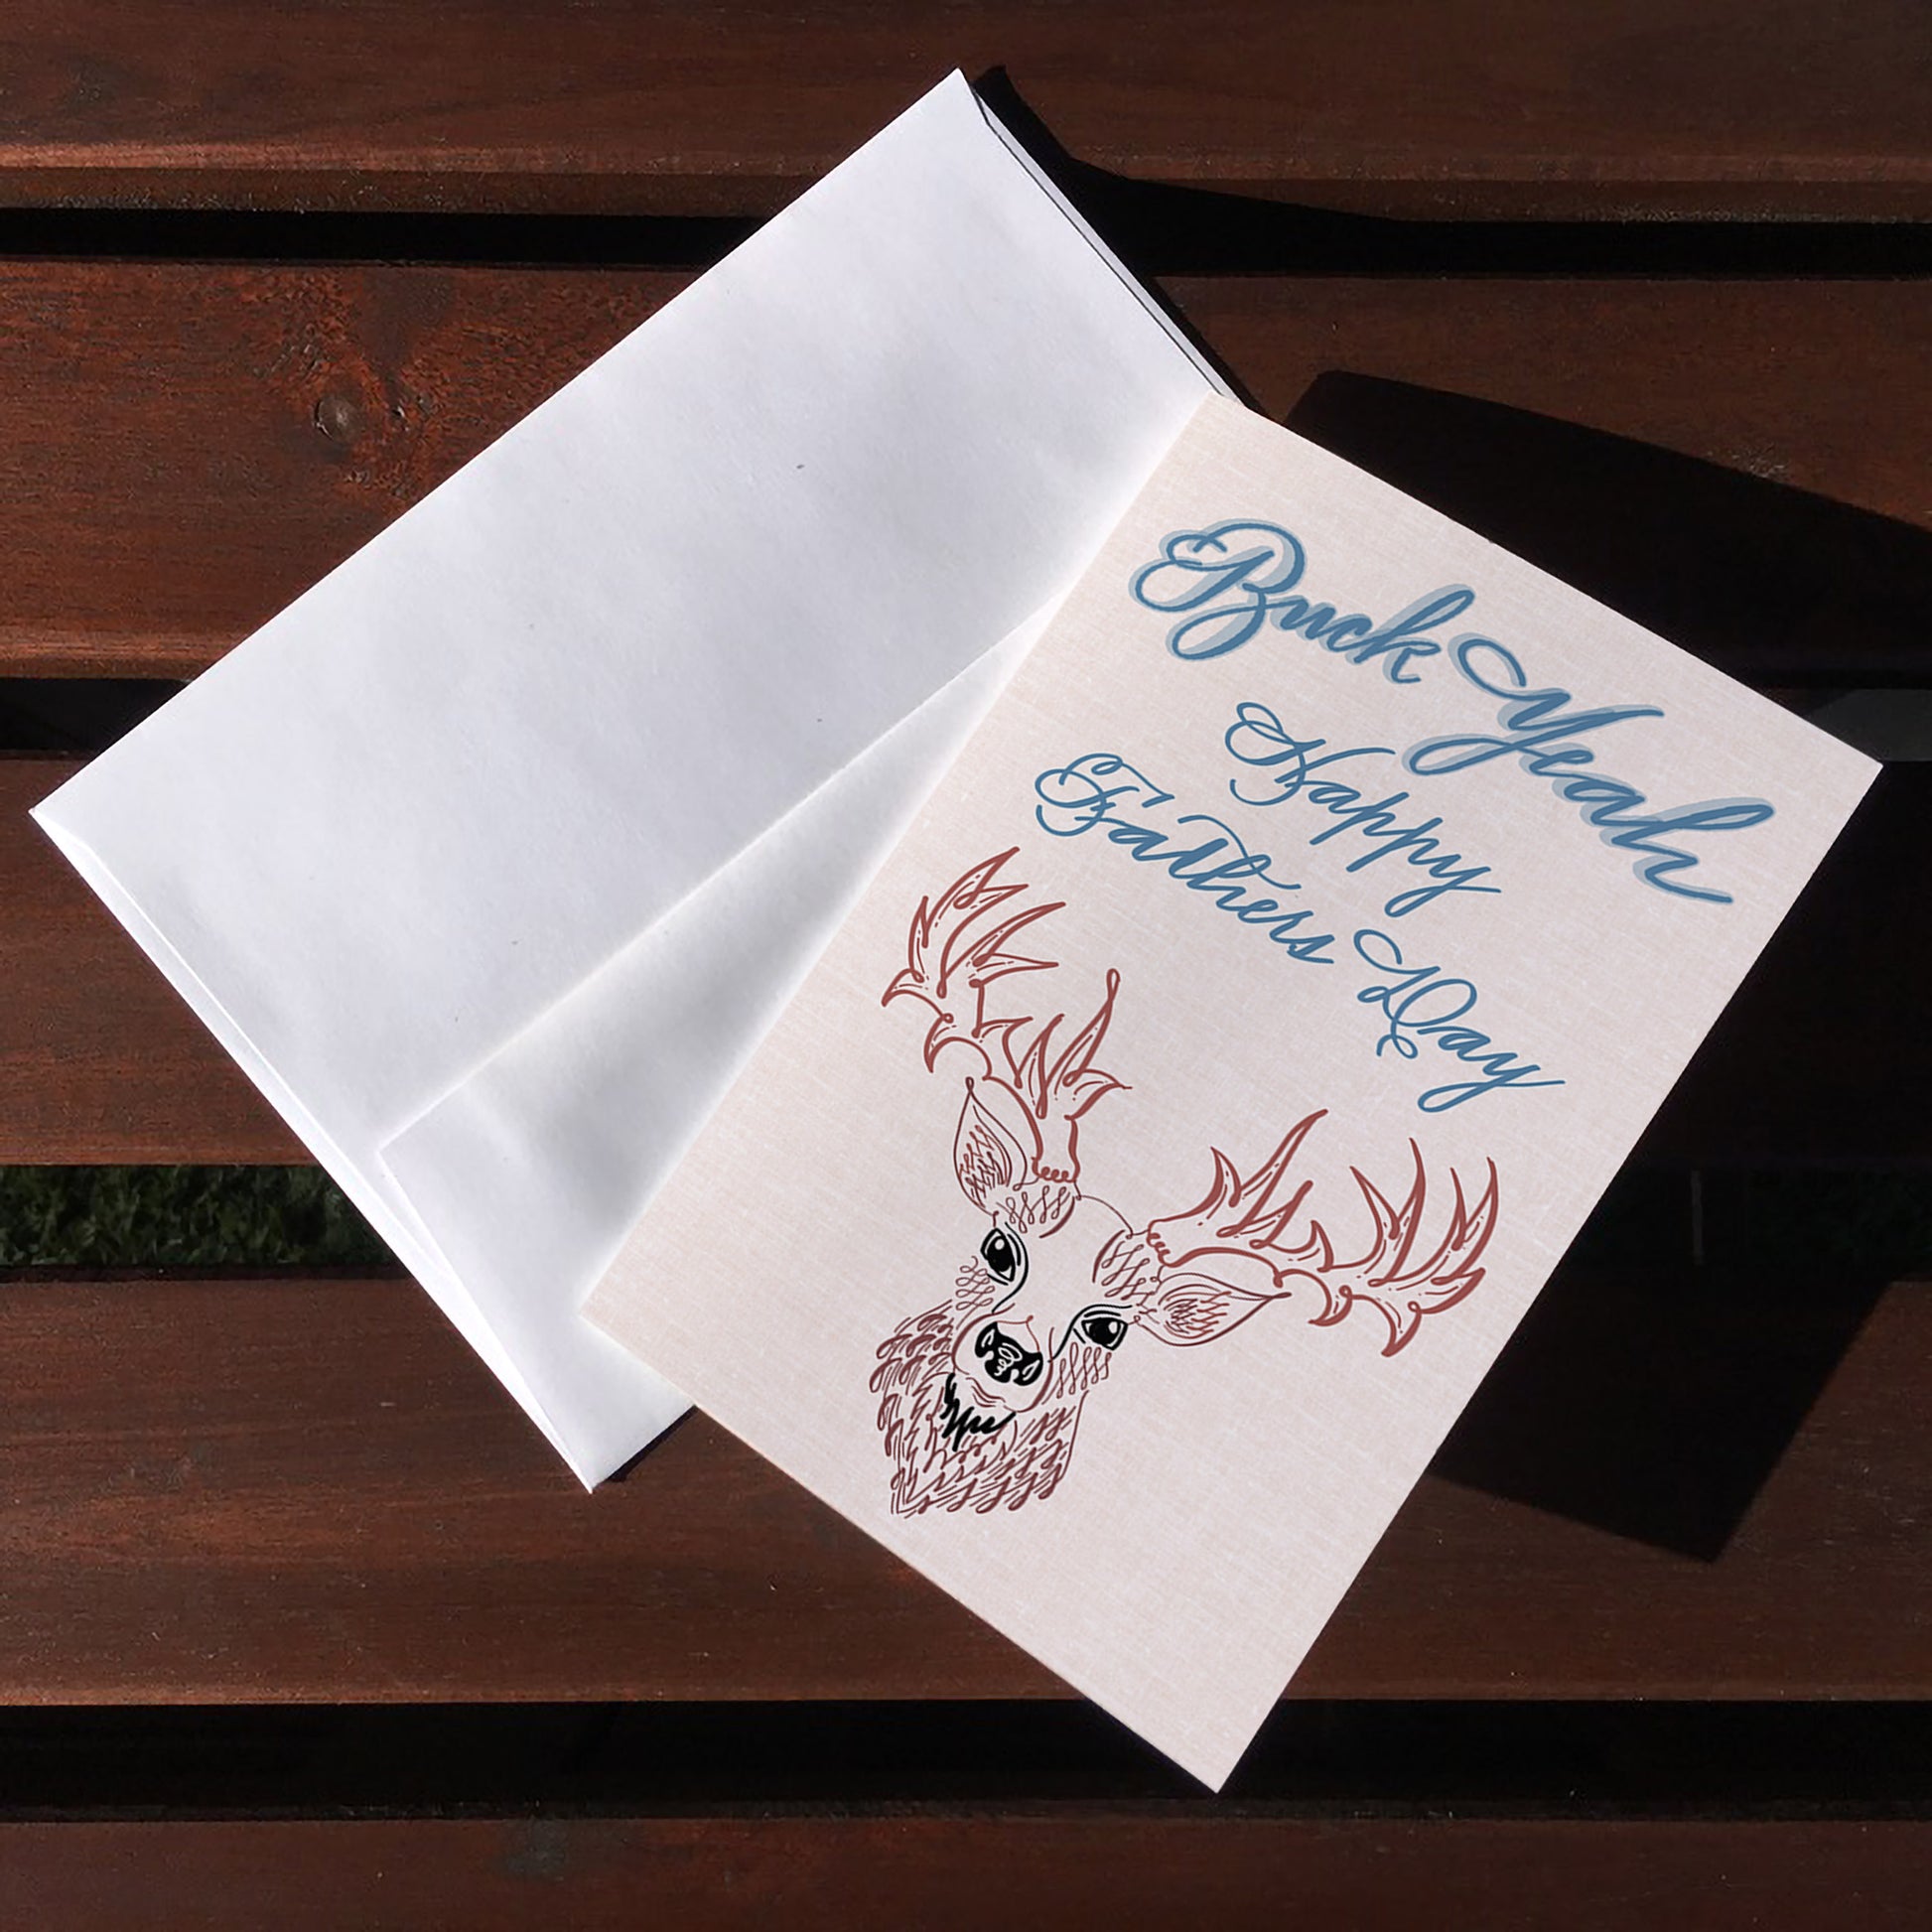 A top view of the Toronto Calligraphy pun greeting card: "Buck Yeah - Happy Fathers Day"